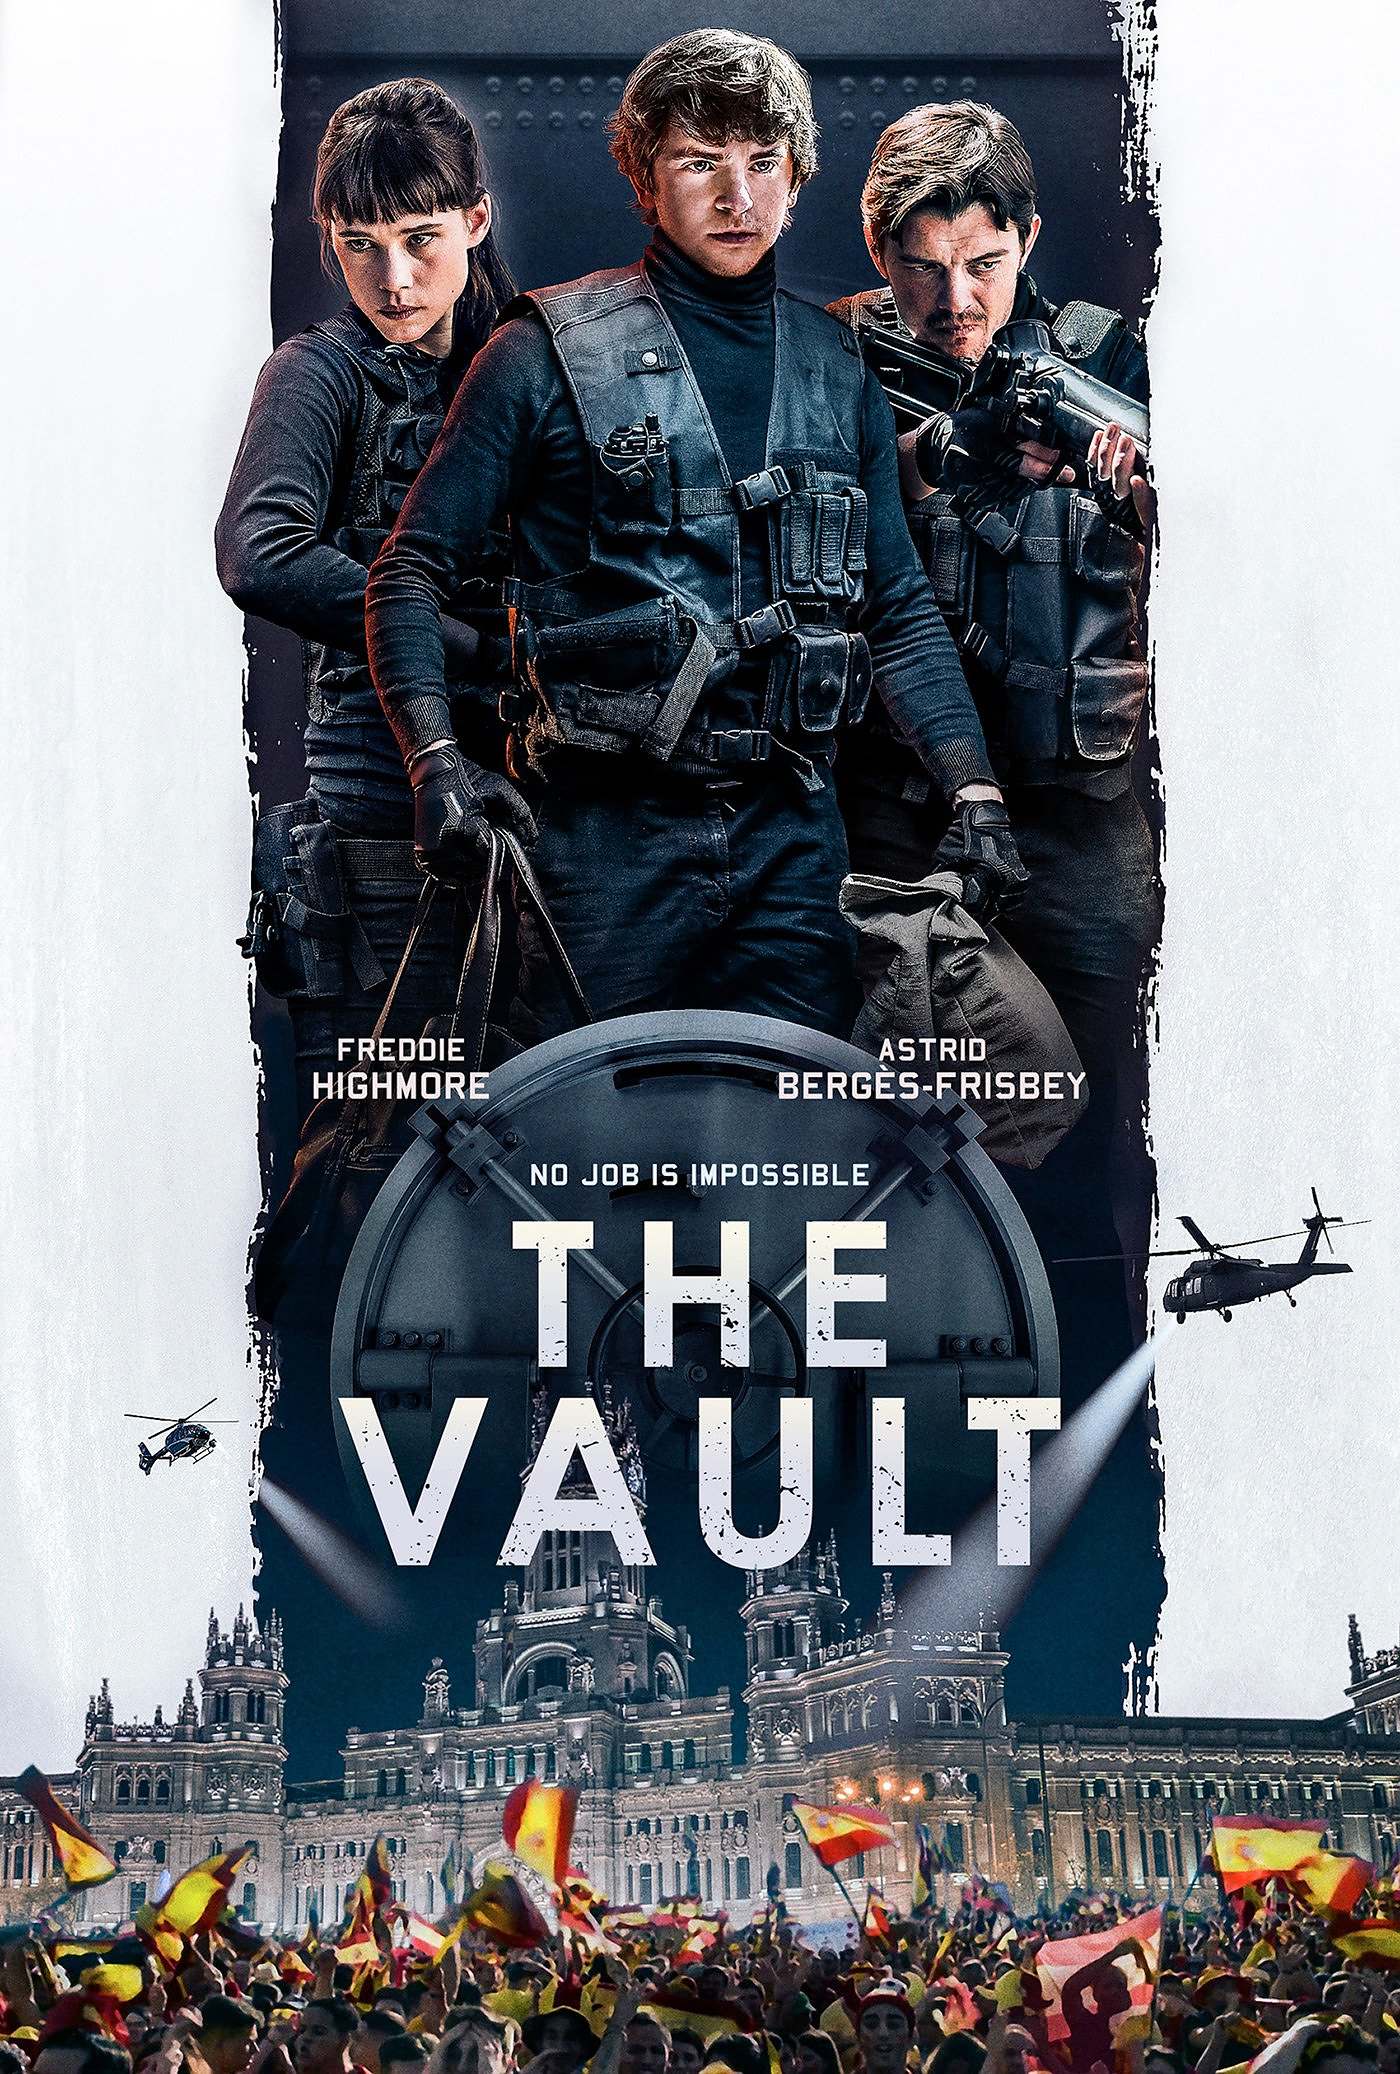 1st Trailer For ‘The Vault’ Movie